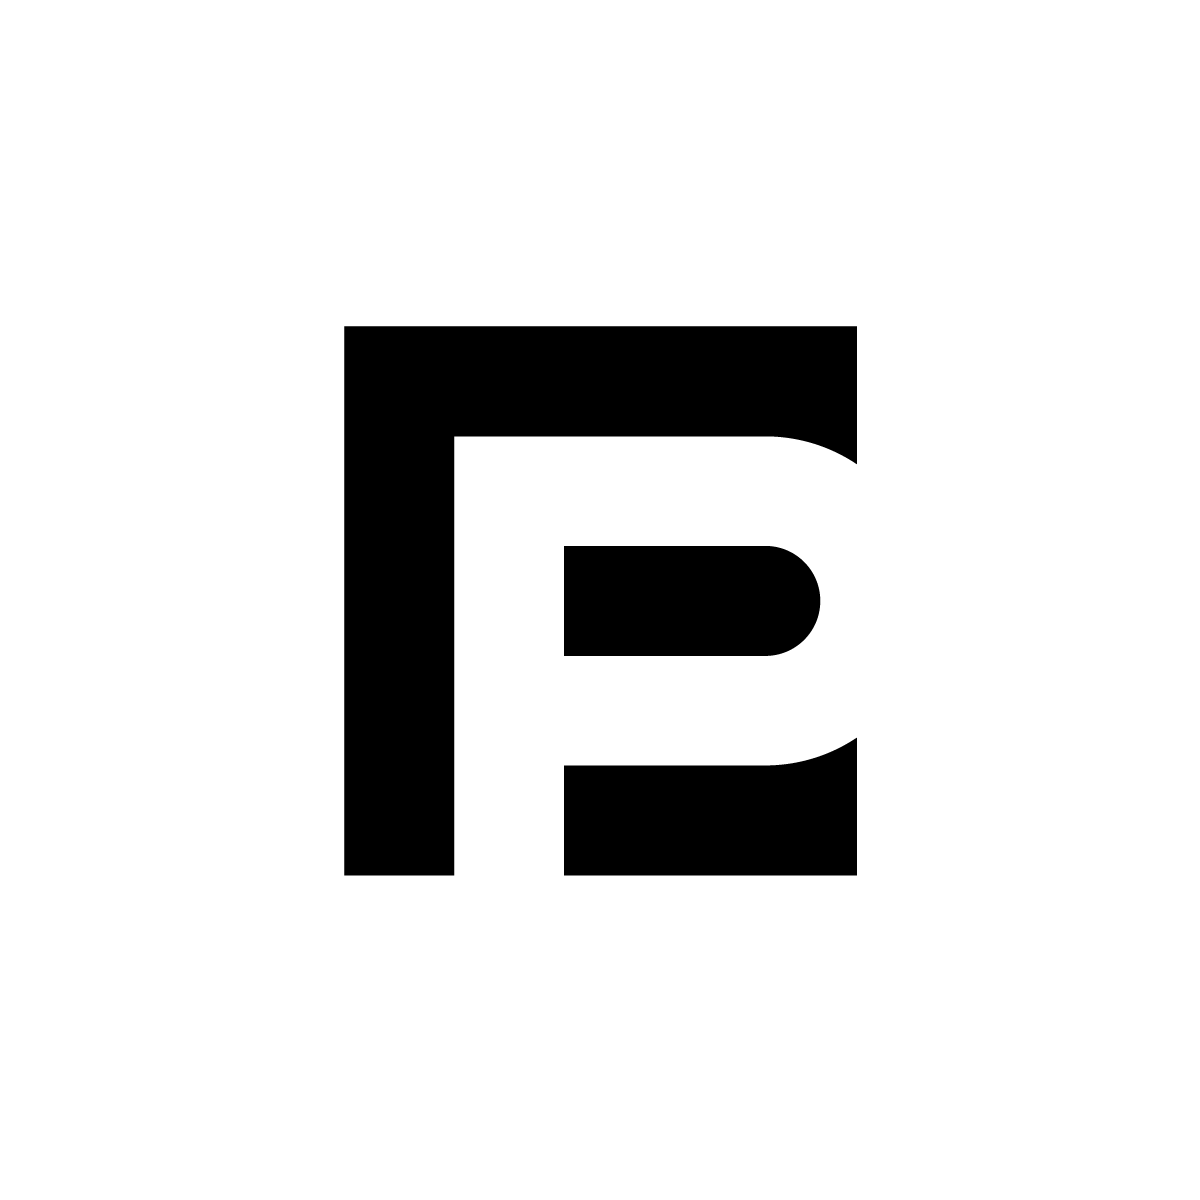 Modern monogram logo elegantly combining letters 'E' and 'P' in negative space, utilizing simple geometrical forms for a versatile appearance.